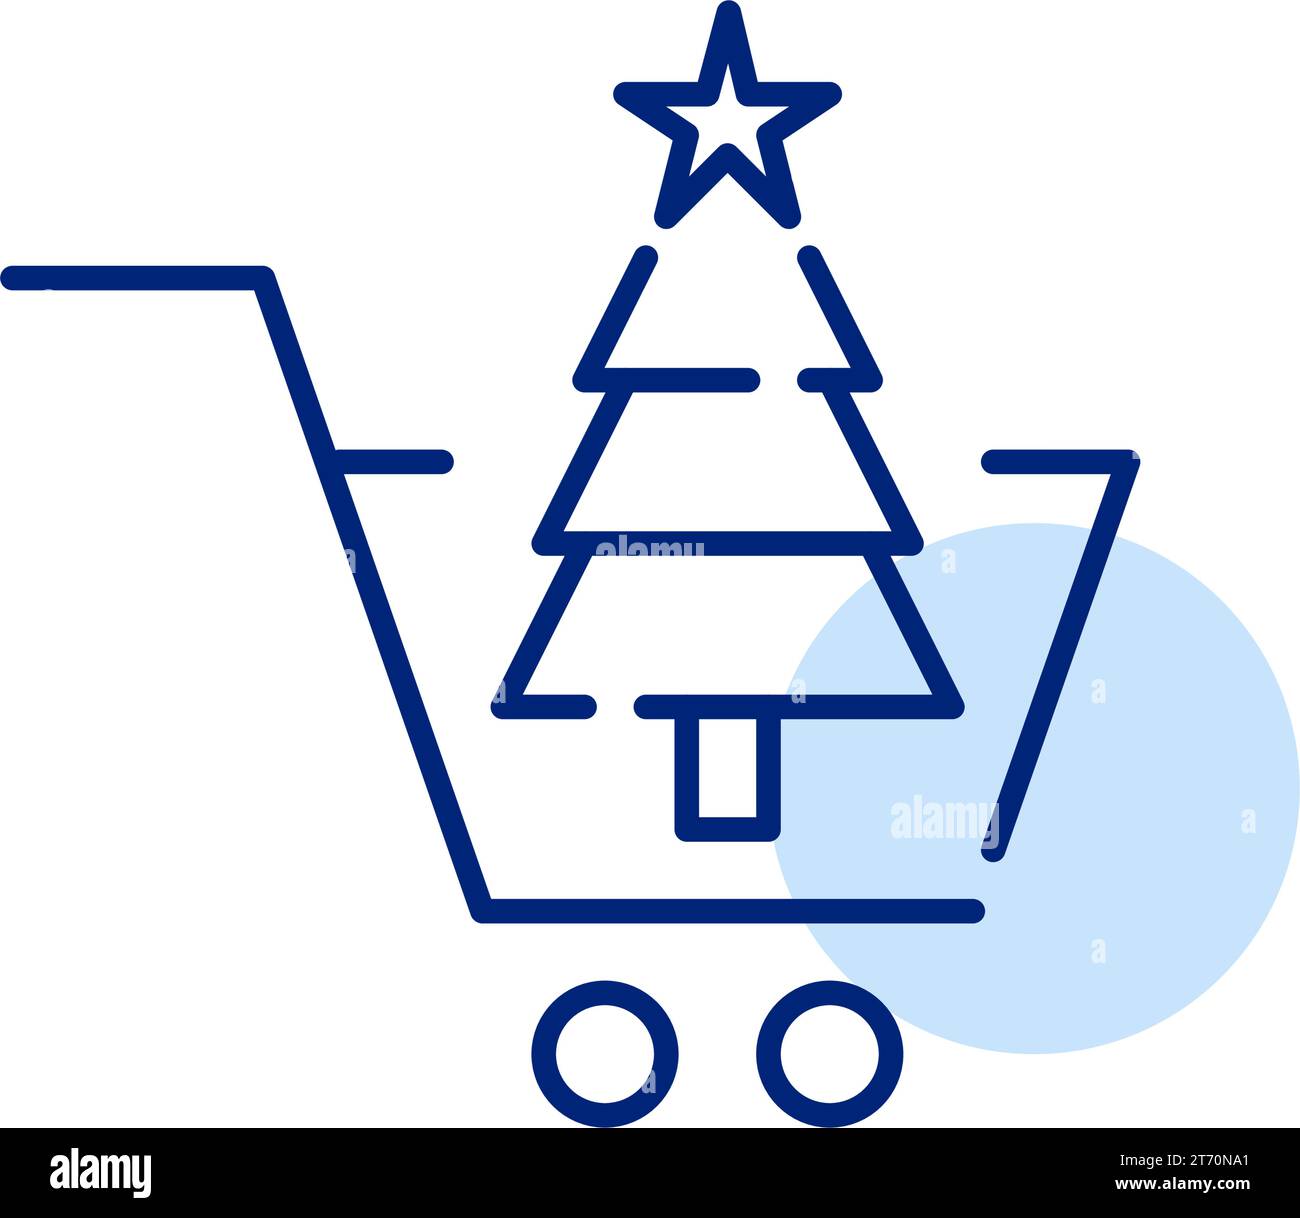 Christmas tree with star on top in shopping cart. Pixel perfect icon Stock Vector